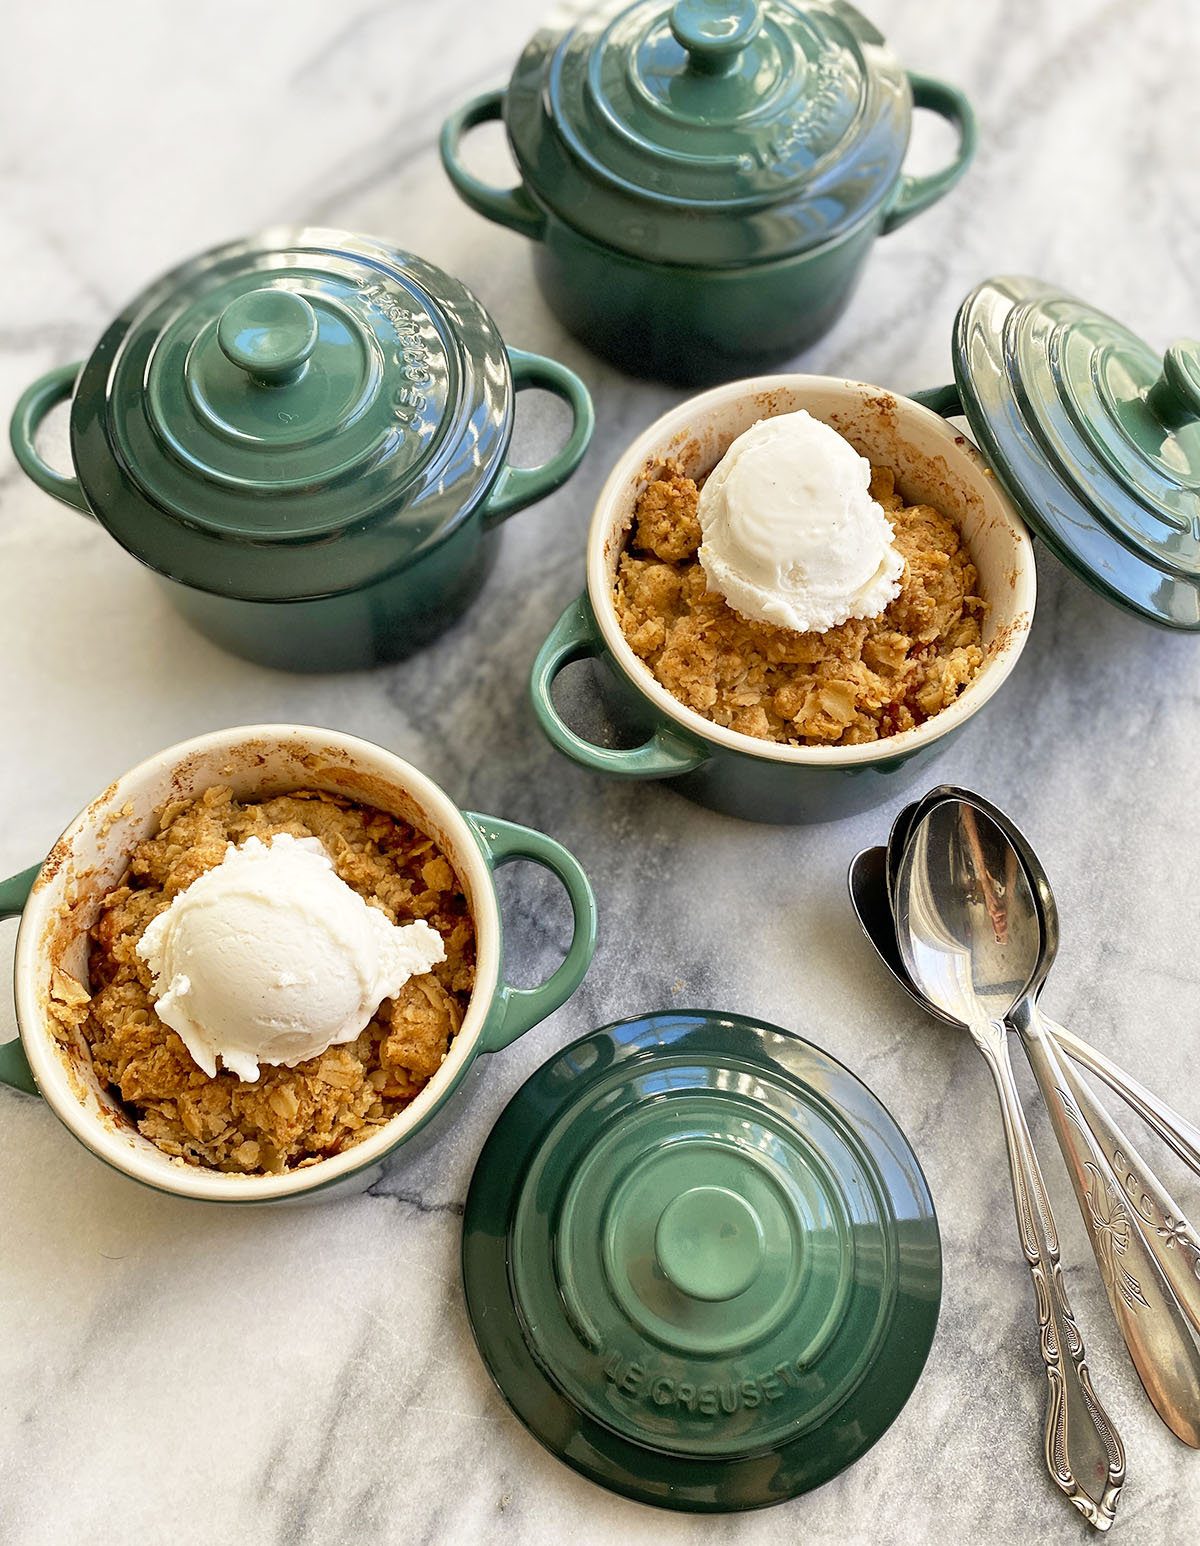 Individual mini le creuset green baking dishes with apple crumble and vanilla ice-cream and spoons sitting on marble counter. 